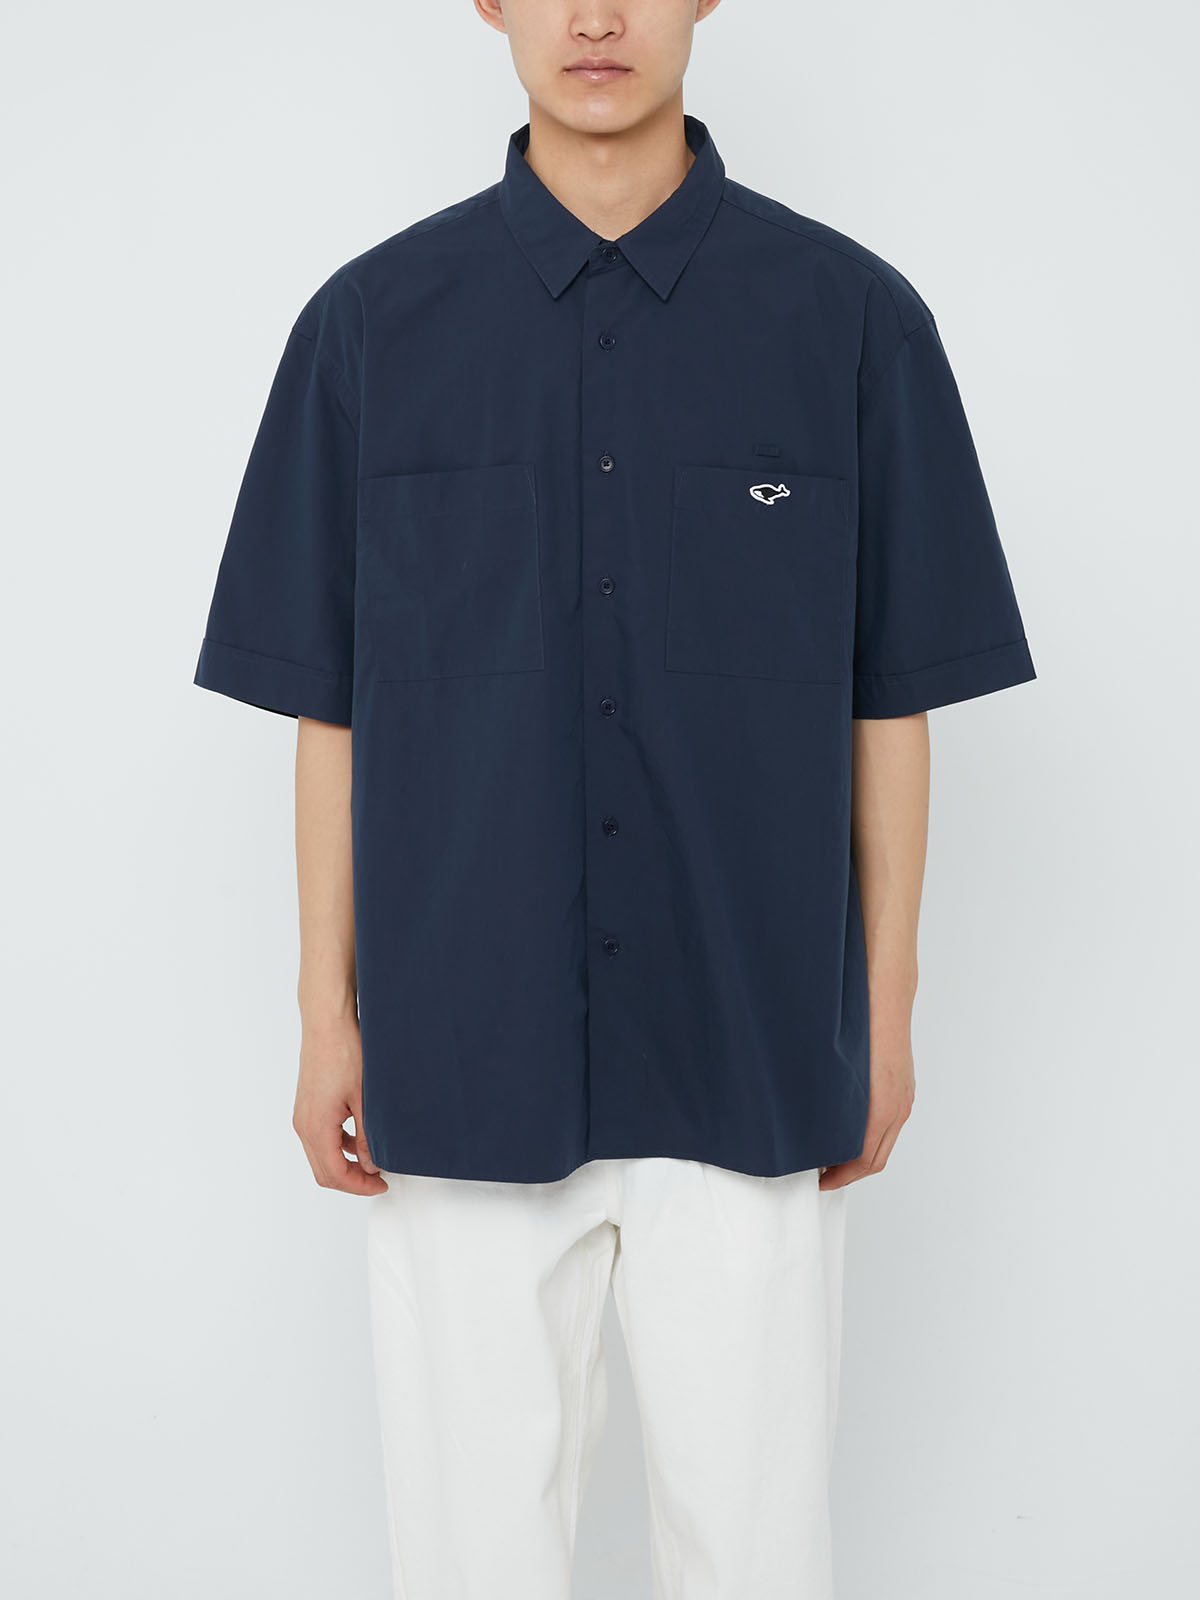 RELAXED S/S SHIRT (NAVY)